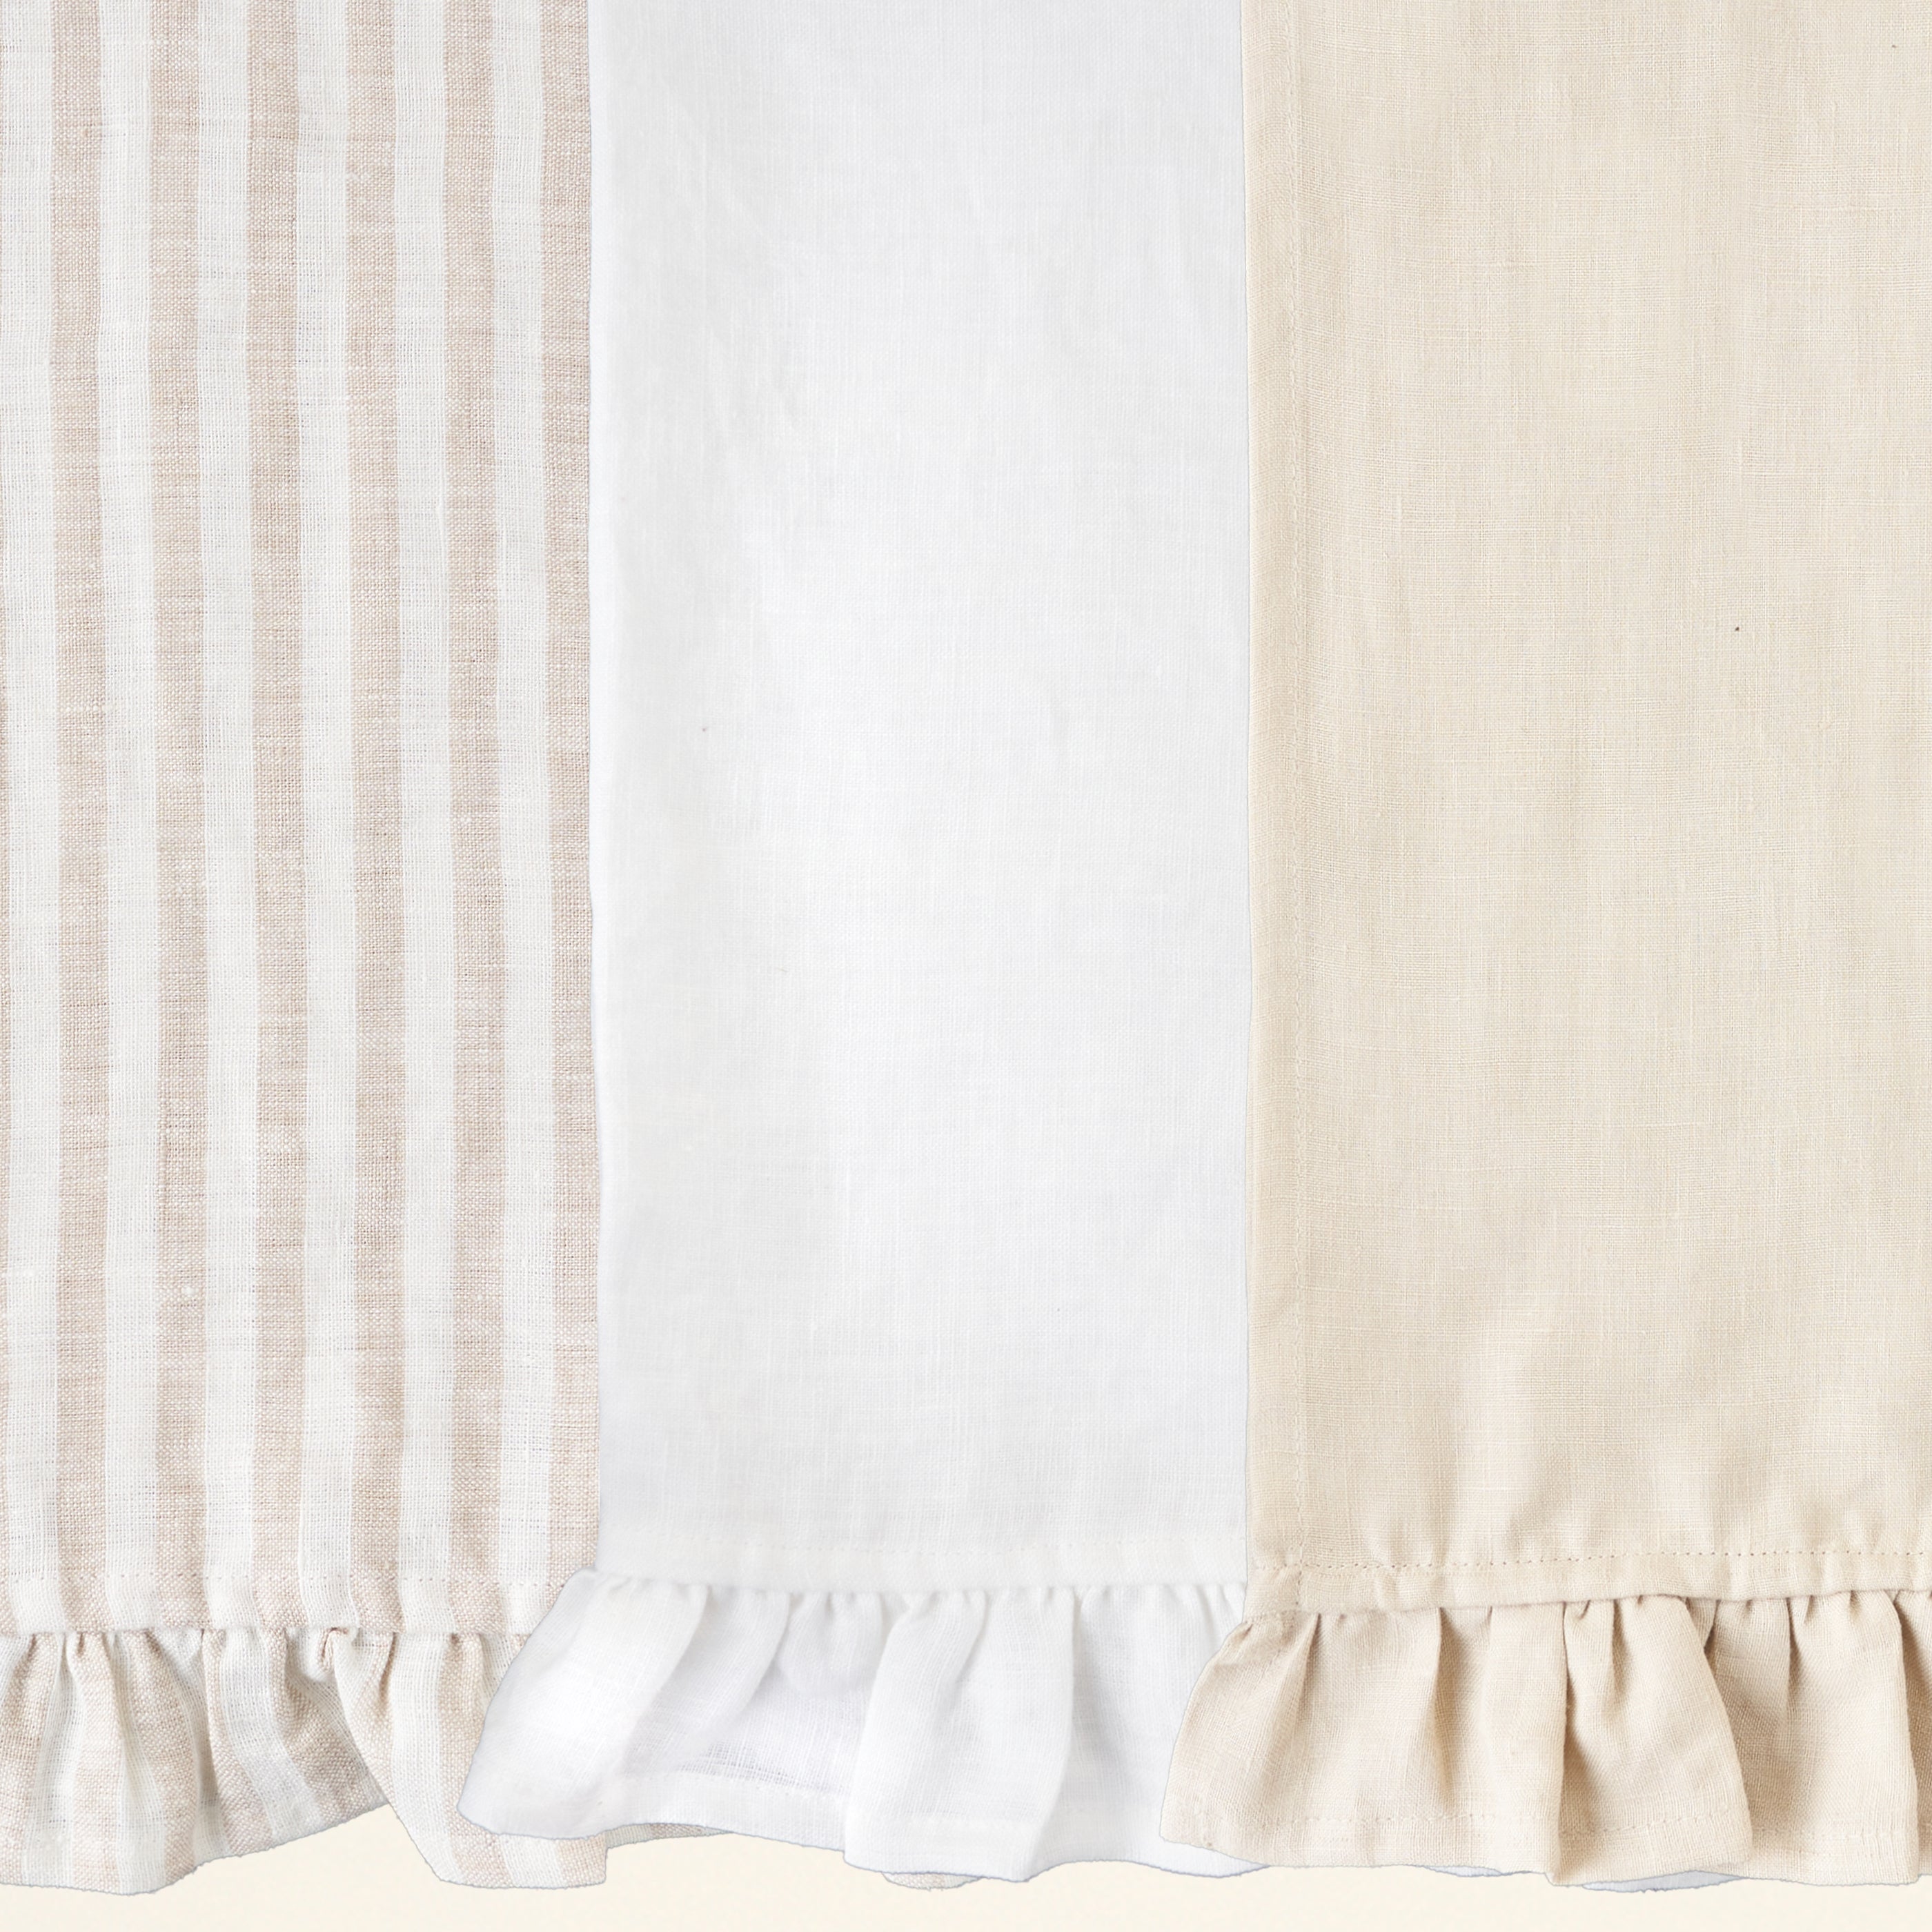 Striped linen towel / Durable towels / Rough stonewashed towels